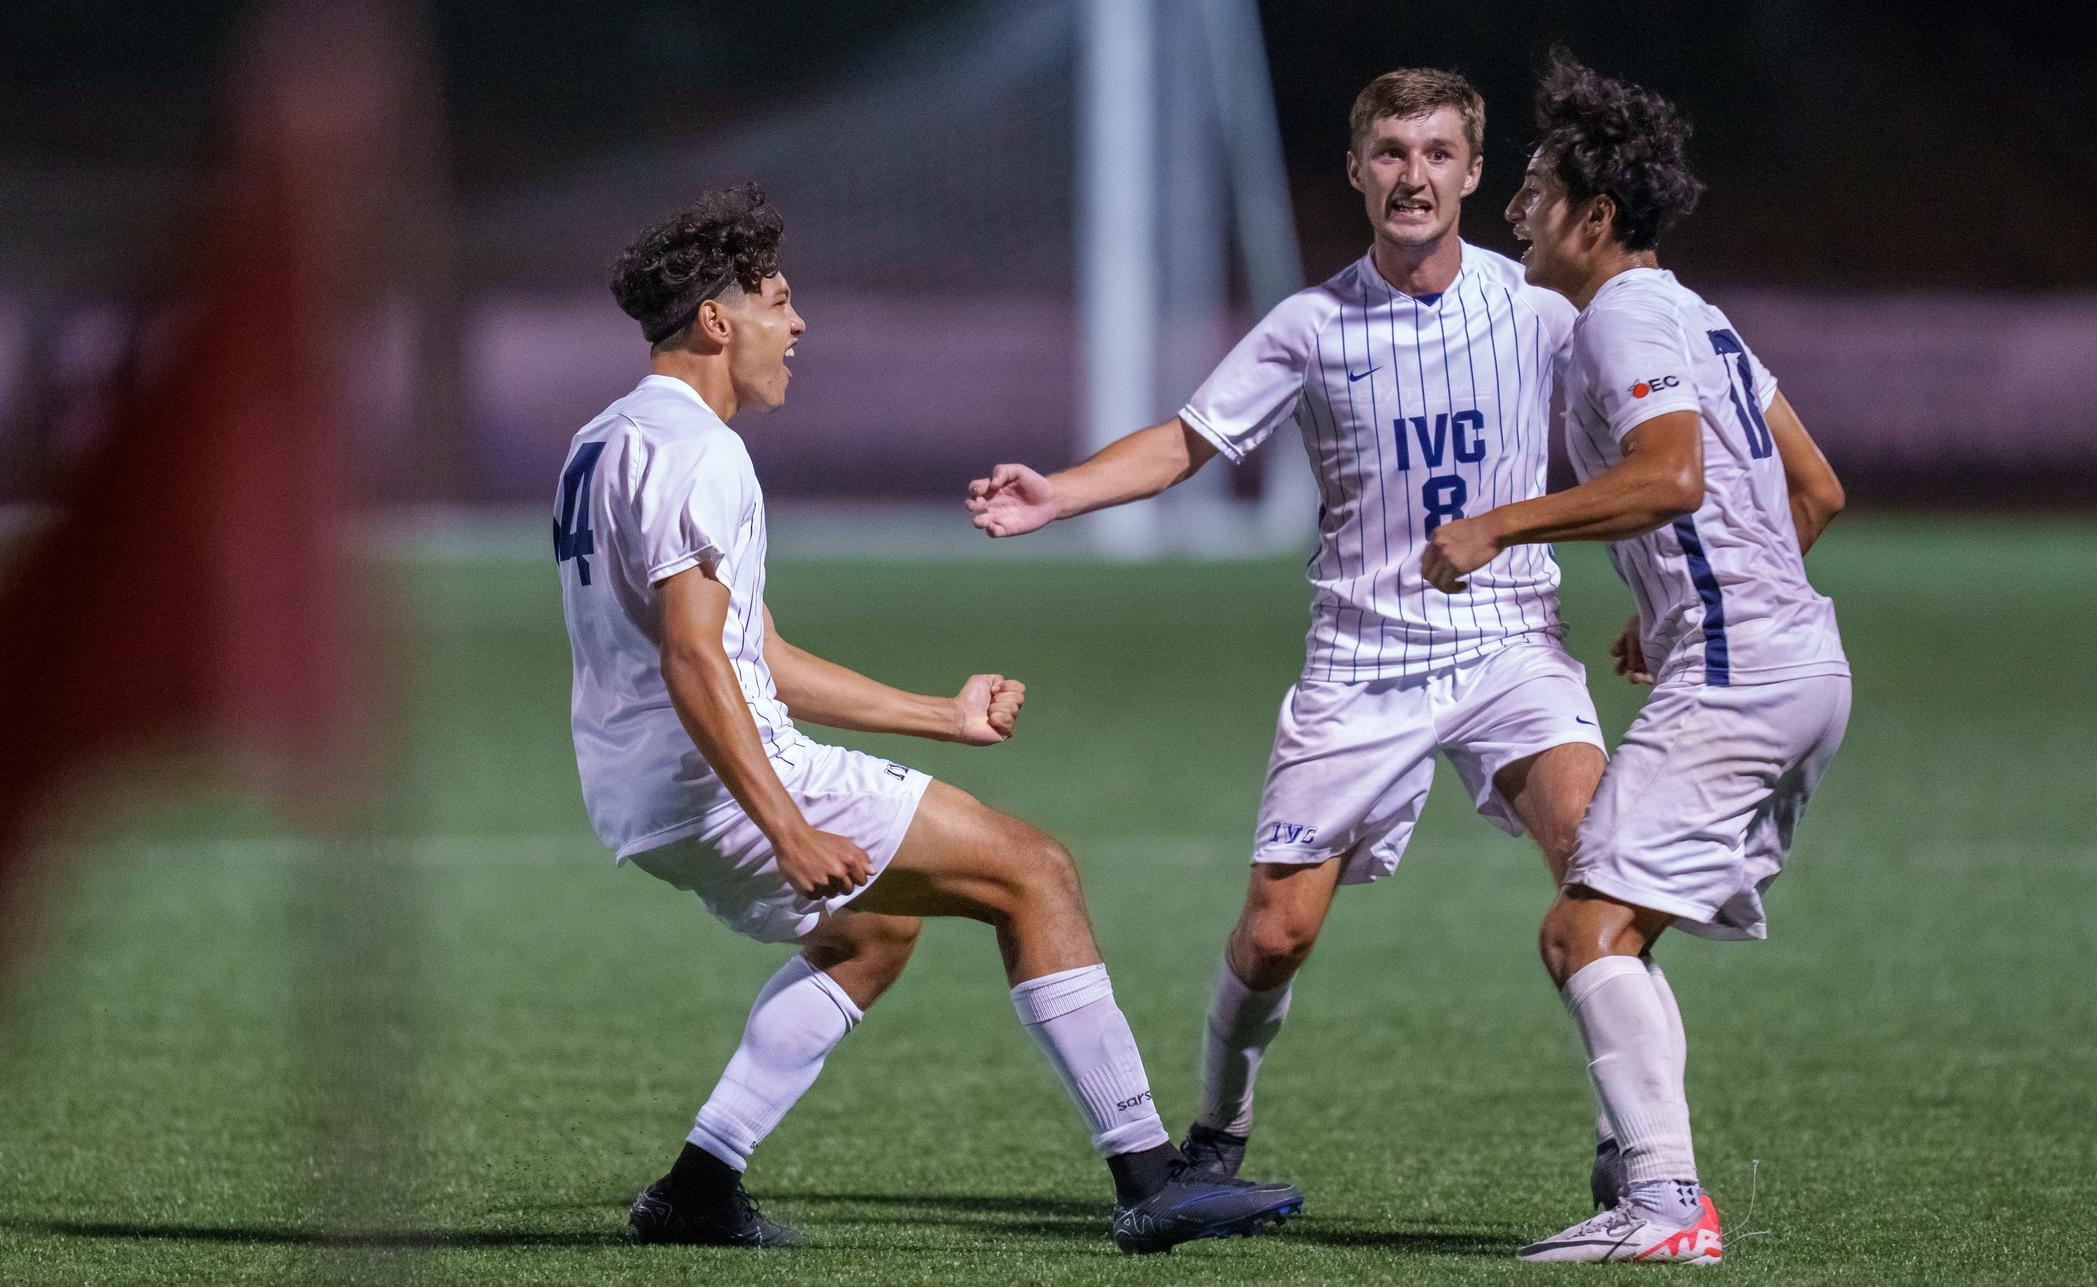 Men's soccer team goes on the road, rallies to beat Rio Hondo